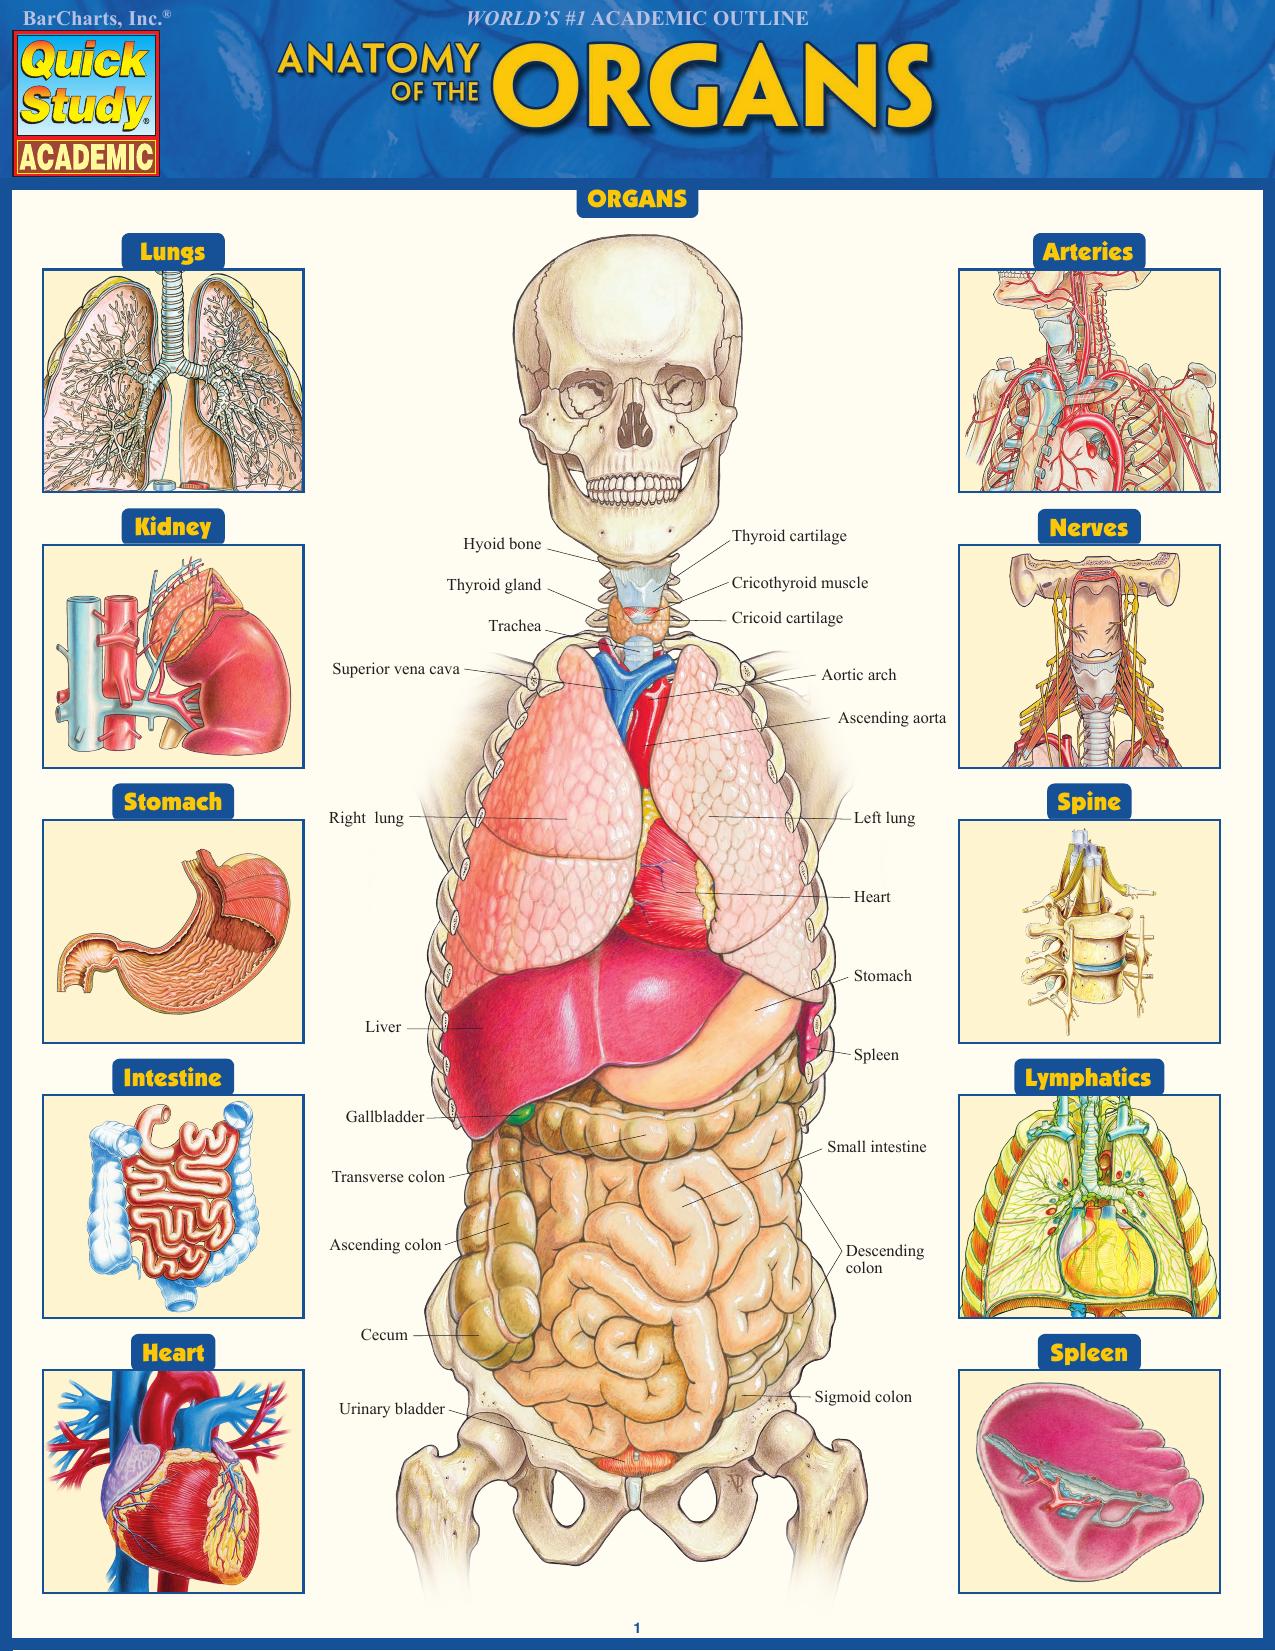 Download Anatomy of the Organs (Quick Study Academic) - SoftArchive